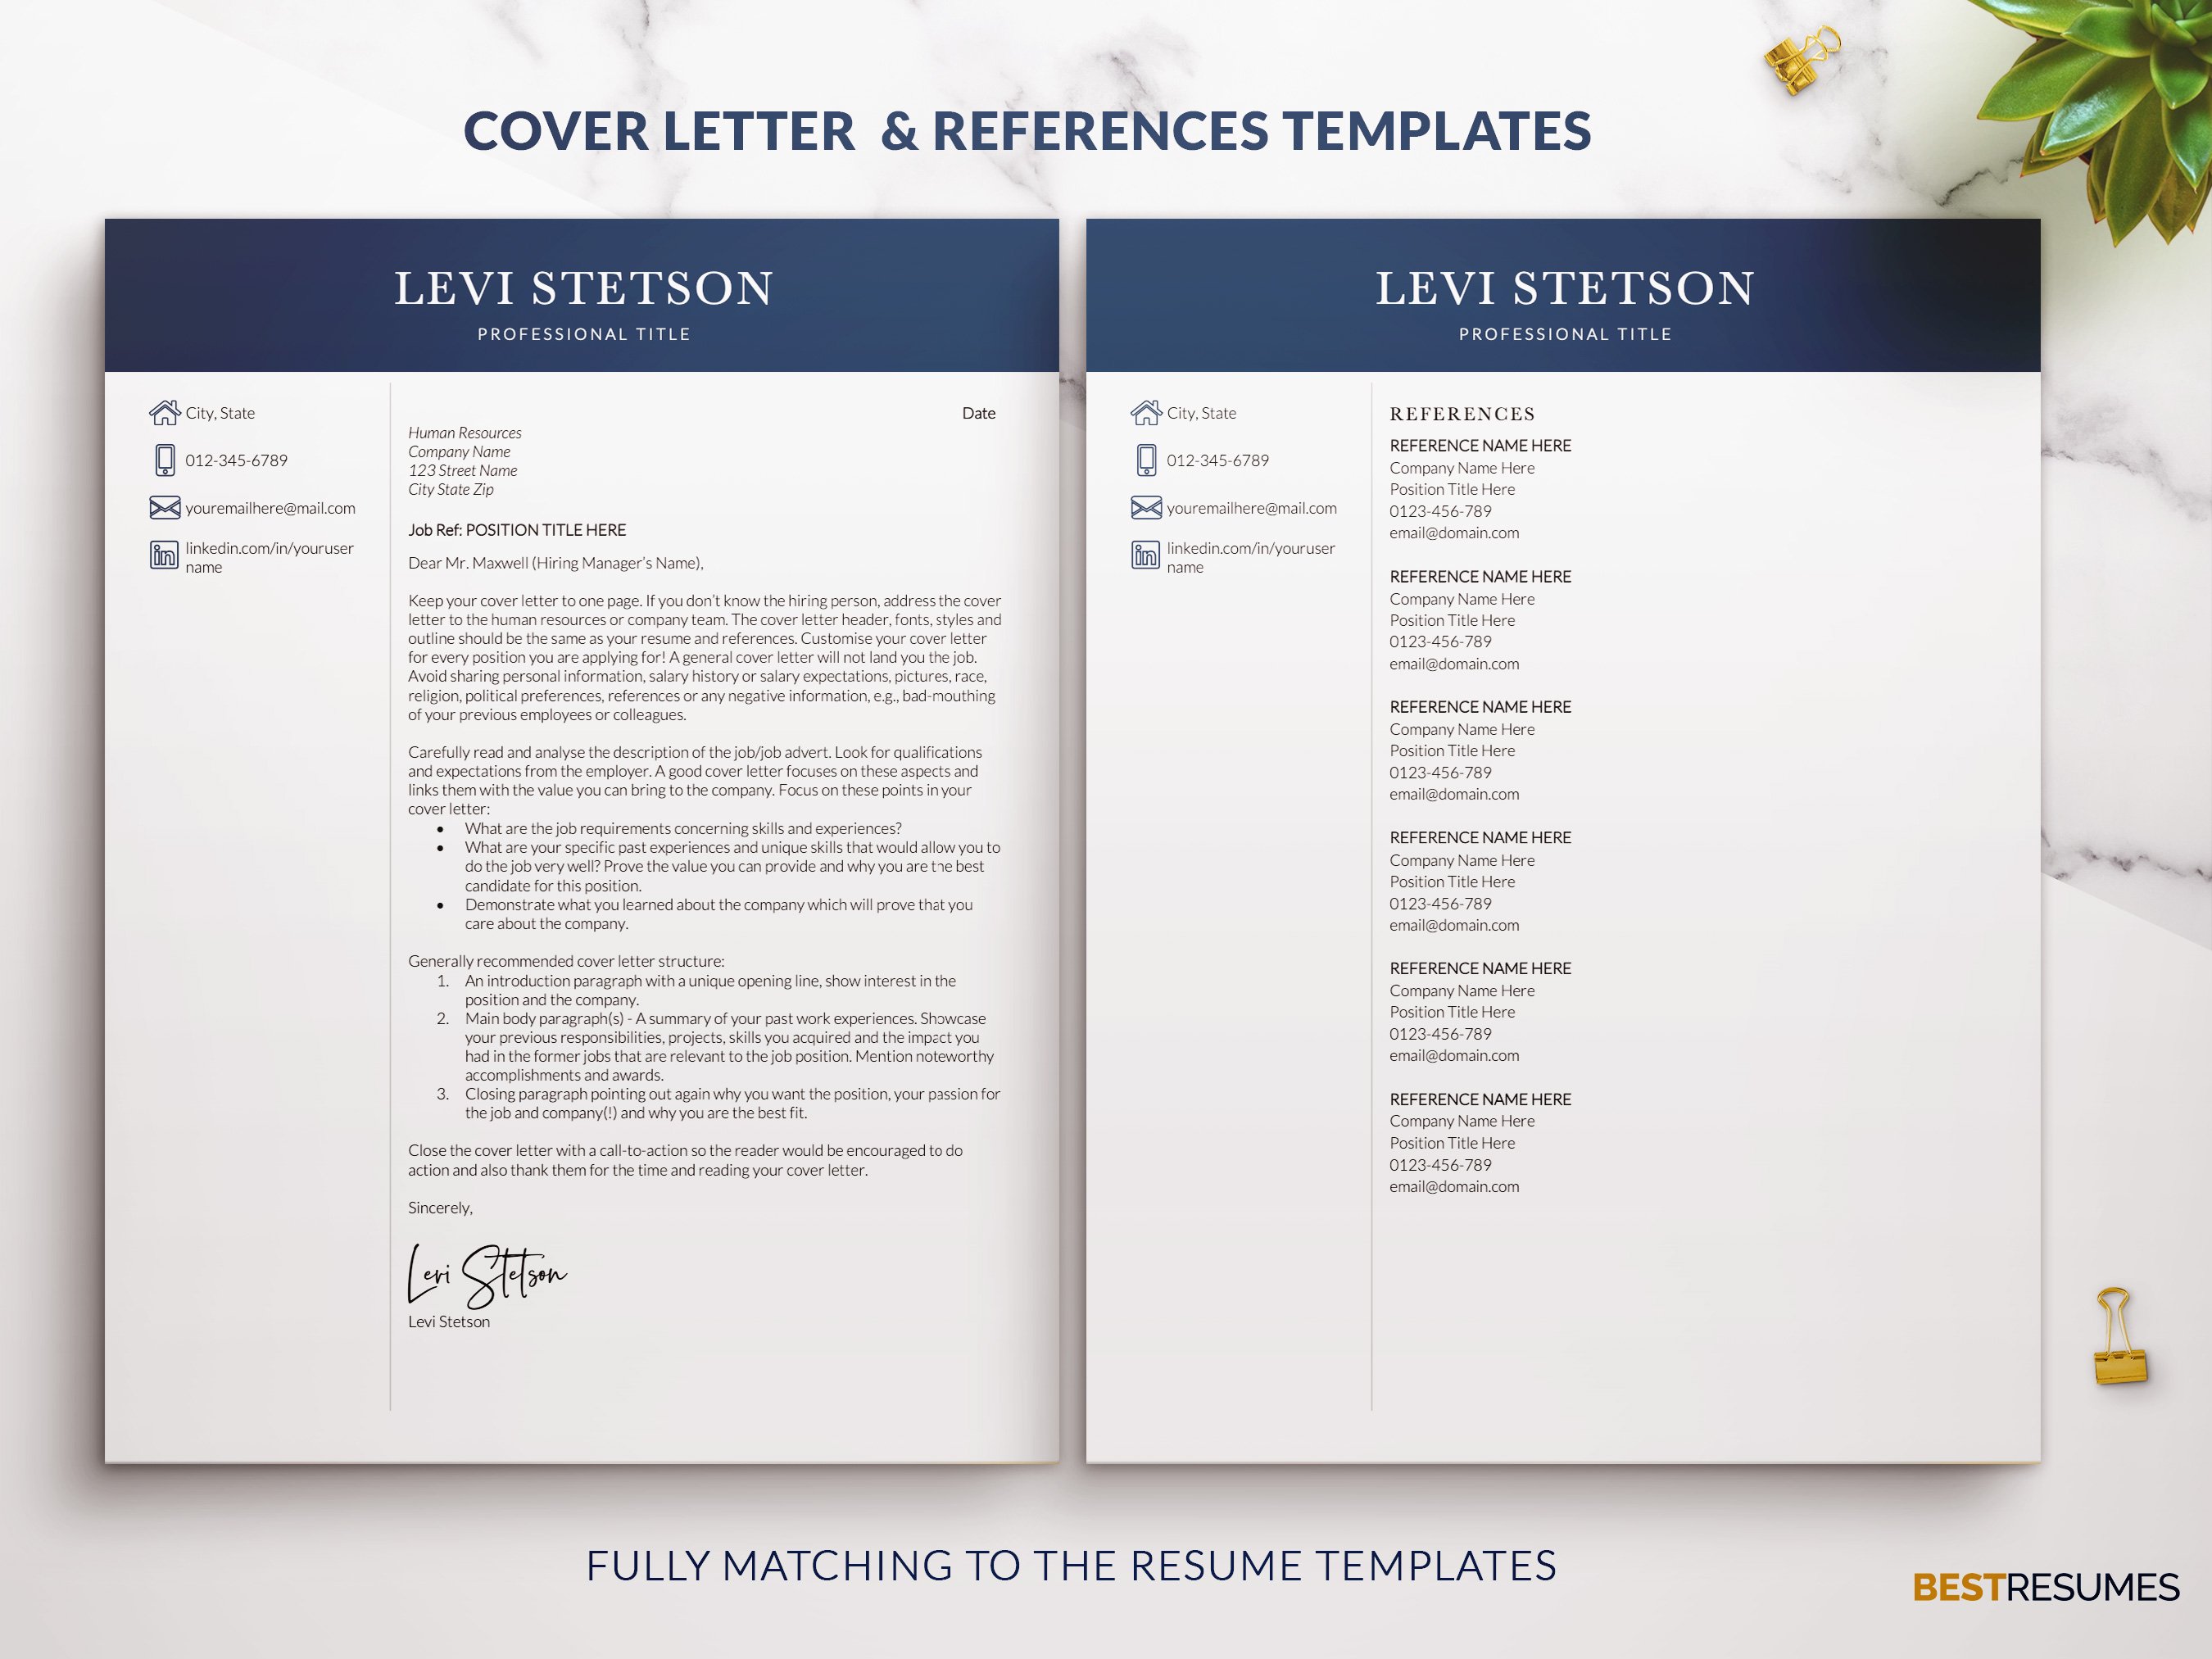 resume template word cover letter references levi stetson 695